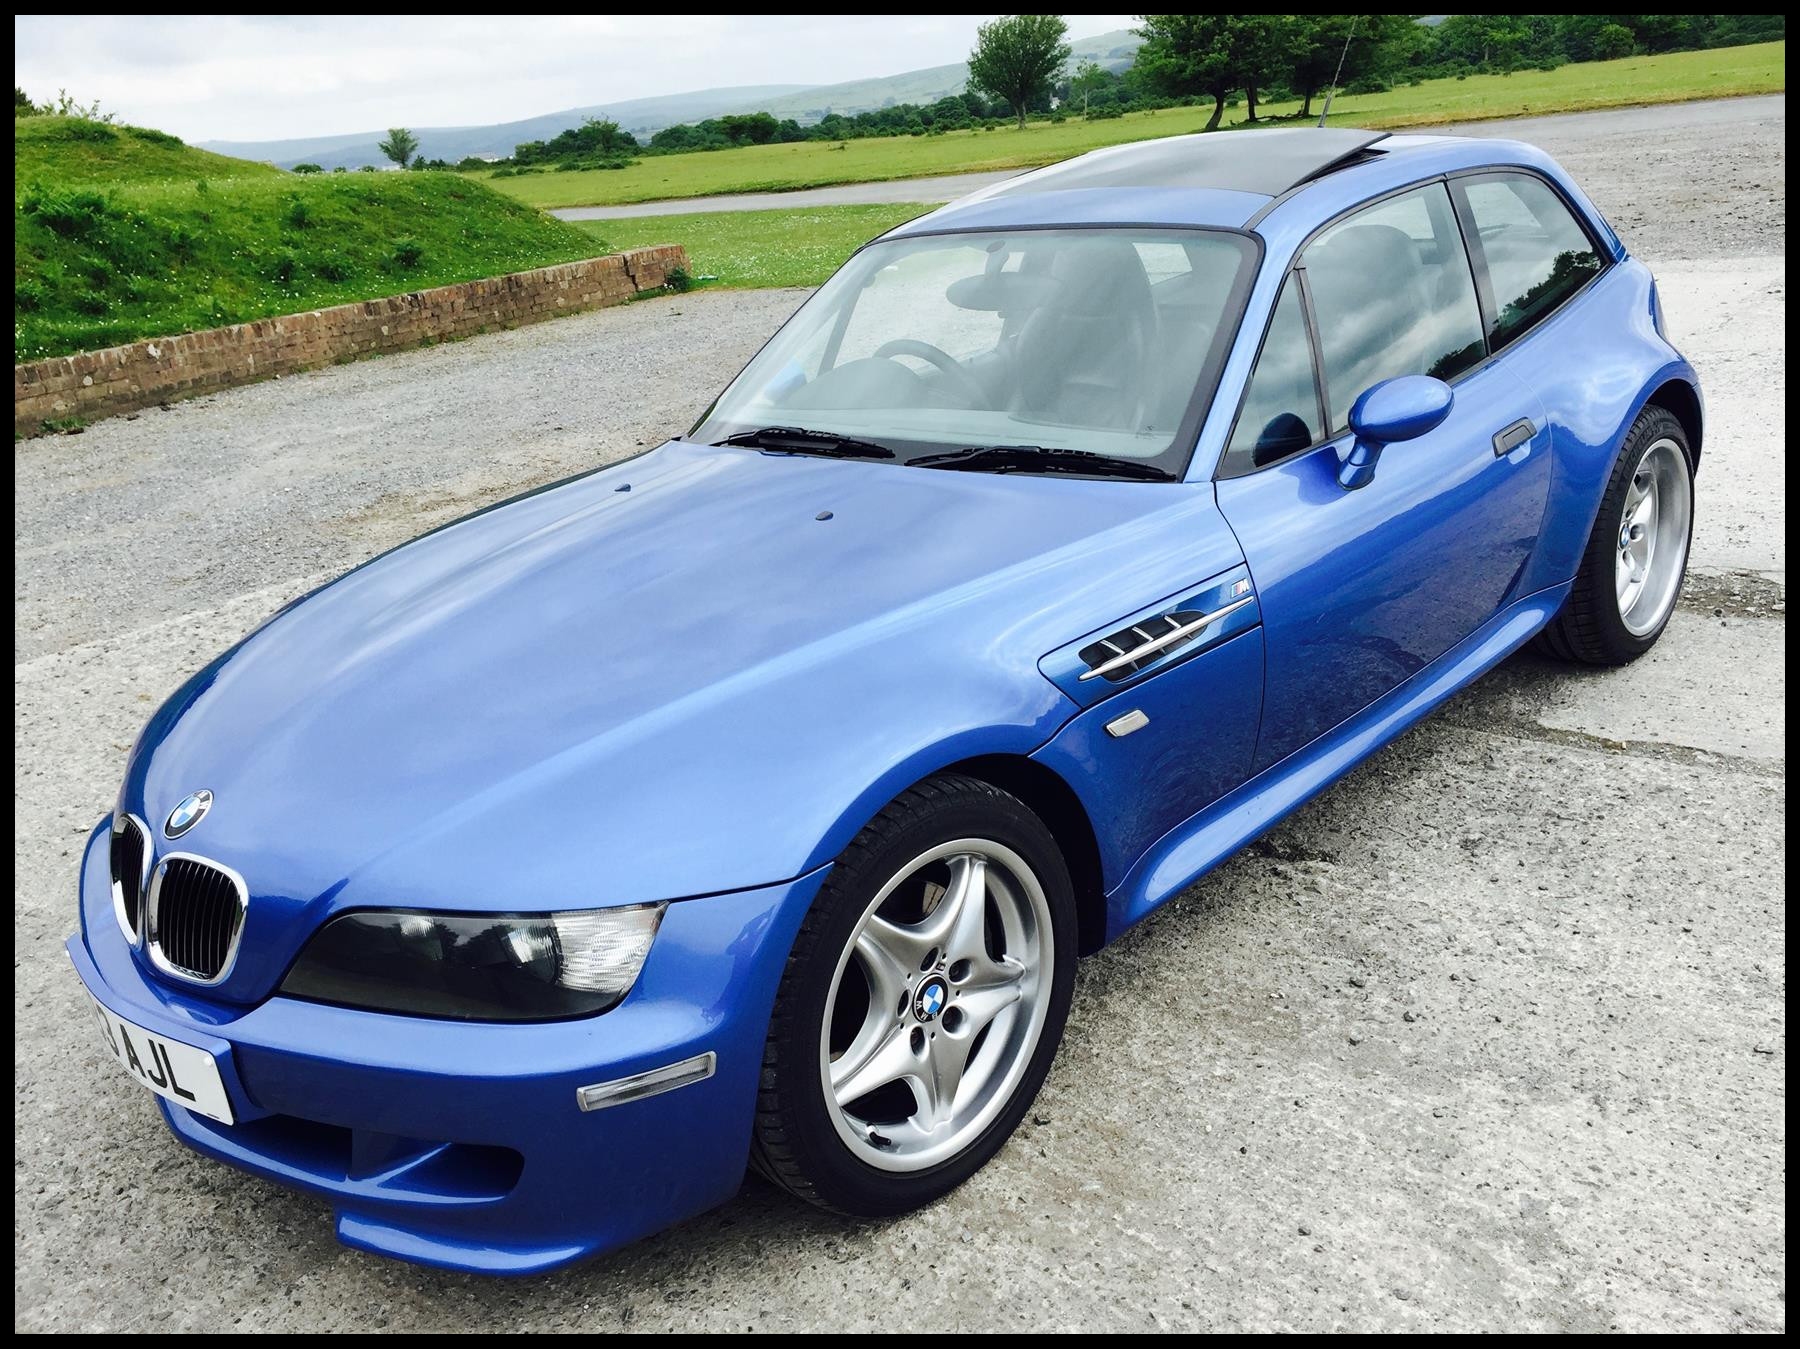 Bmw Z3m Coupe for Sale New Used 1998 Bmw Z3m Coupe M Coupe for Sale In